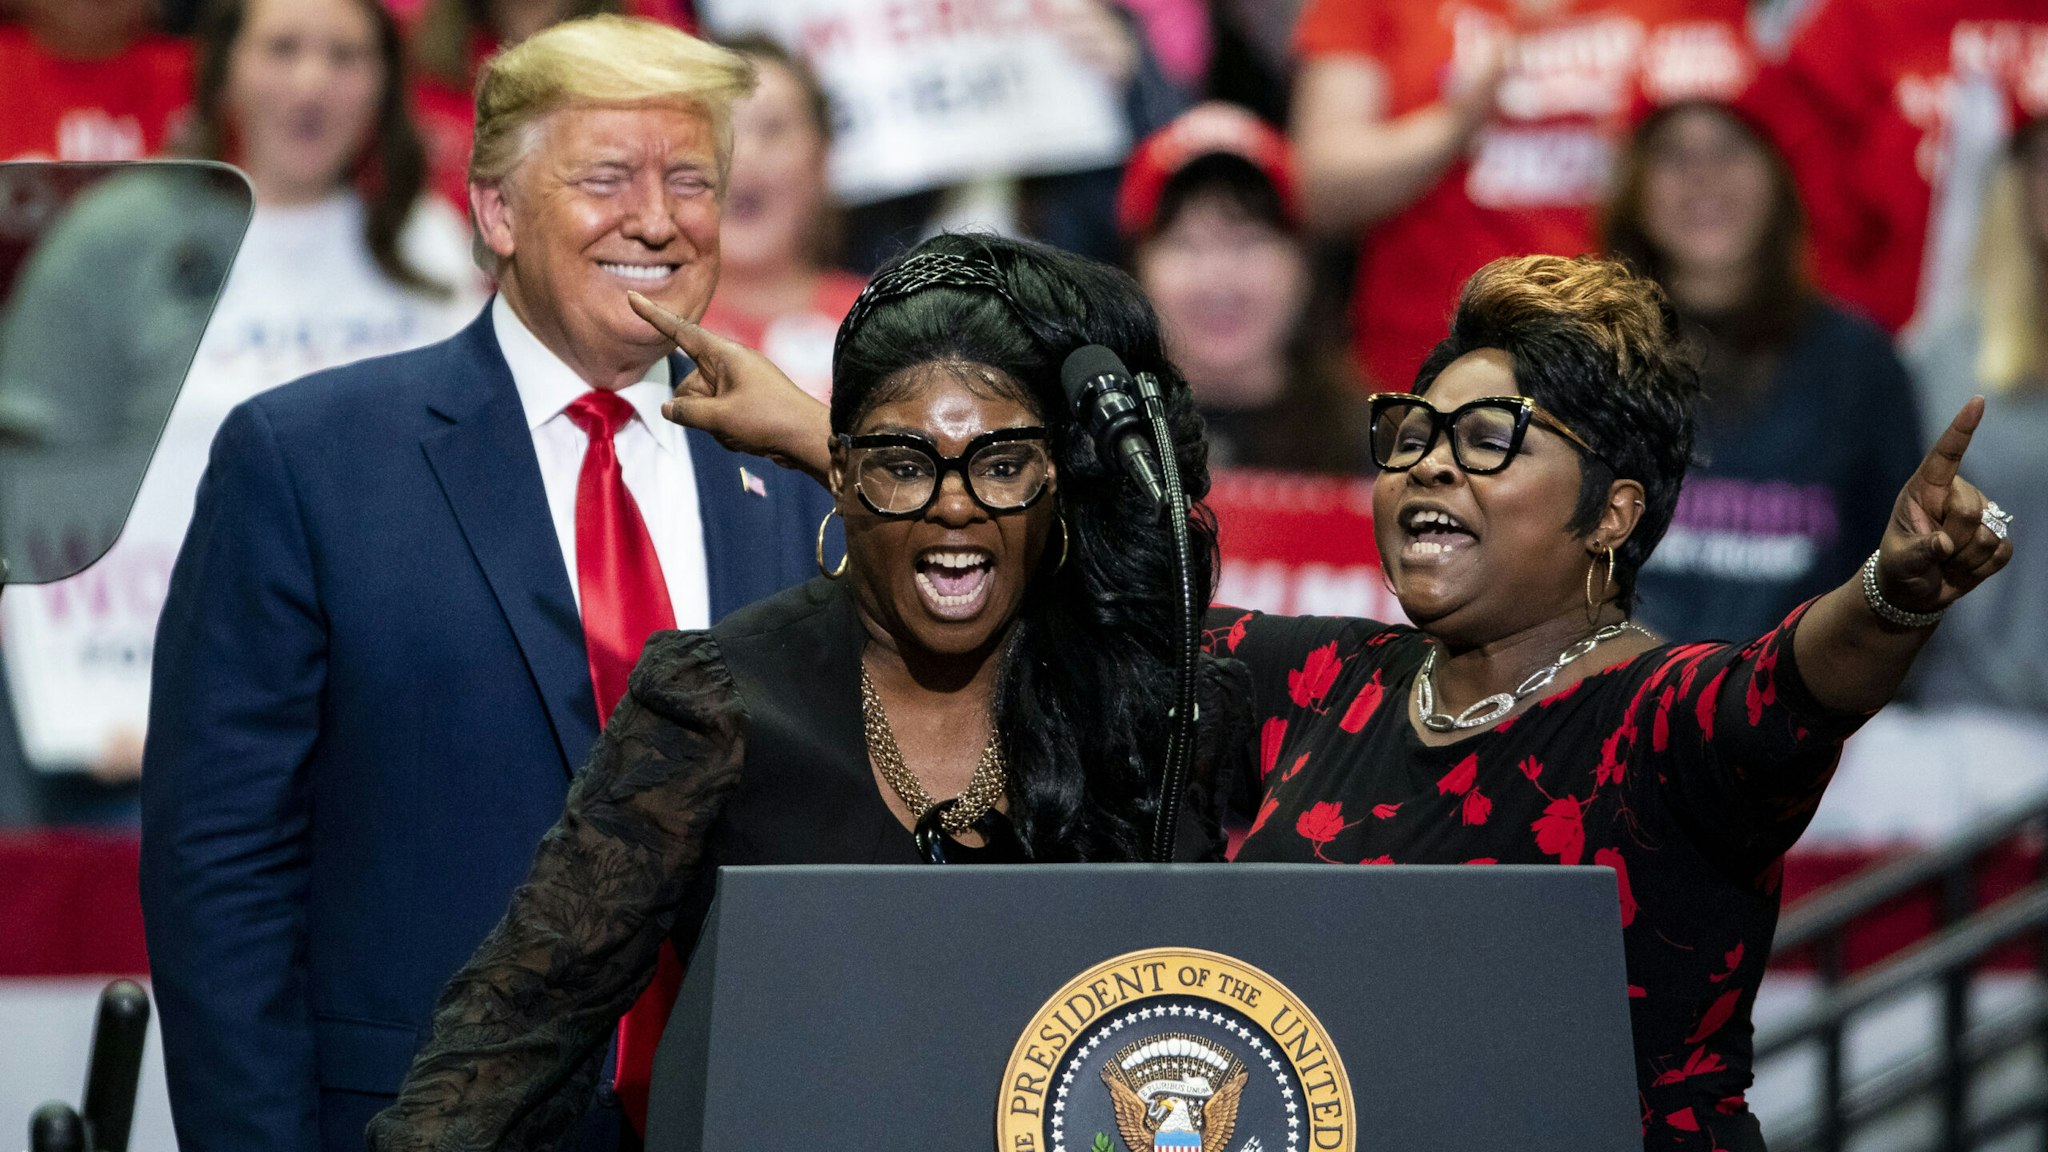 Social Media influencers and video bloggers Lynnette "Diamond" Hardaway, center, and Rochelle "Silk" Richardson, right, speak as U.S. President Donald Trump smiles during a rally in Charlotte, North Carolina, on Monday, March 2, 2020. Trump told reporters in the Oval Office on Monday that holding campaign rallies with thousands of attendees is "very safe" despite recent cases of the virus in the U.S.